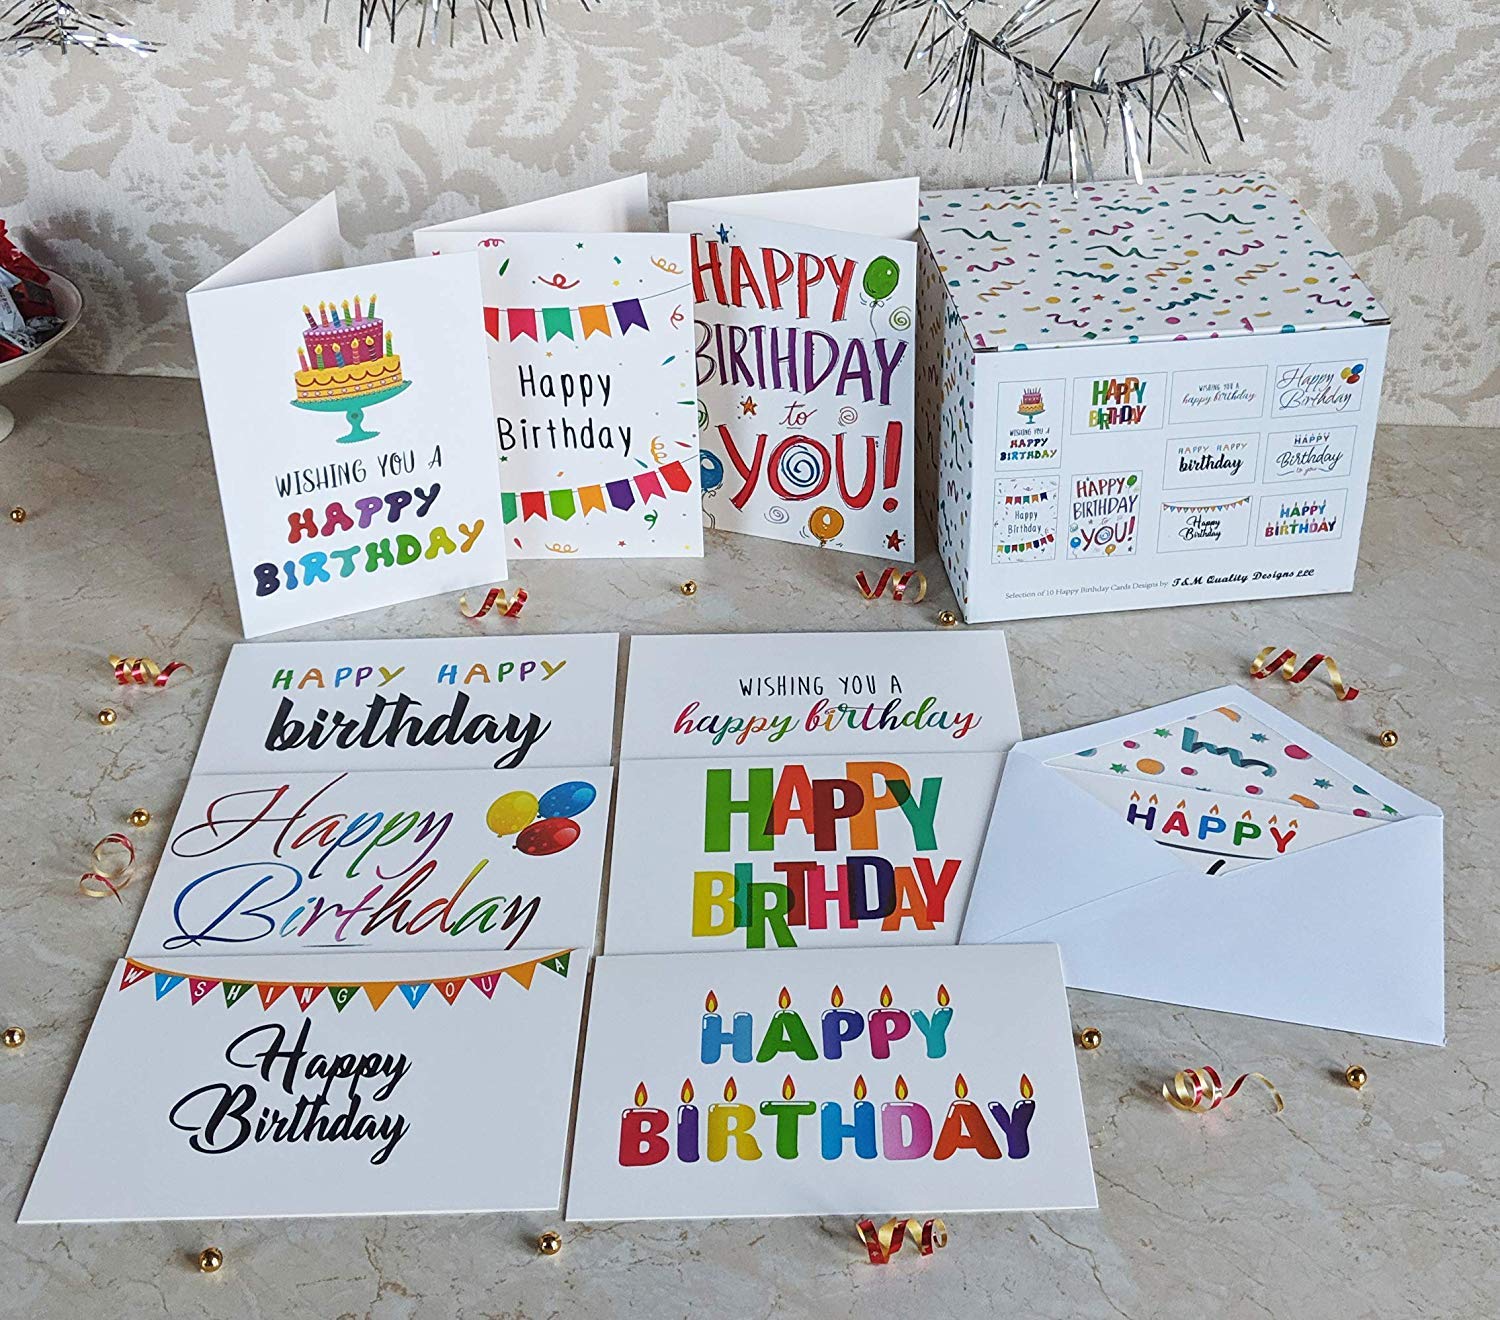 100 Happy Birthday Cards Bulk, Large 5x7 Inch Assorted, with Envelopes ,Stickers and Simple Greetings Inside , 10 Unique Designs, Thick Card Stock Box Set